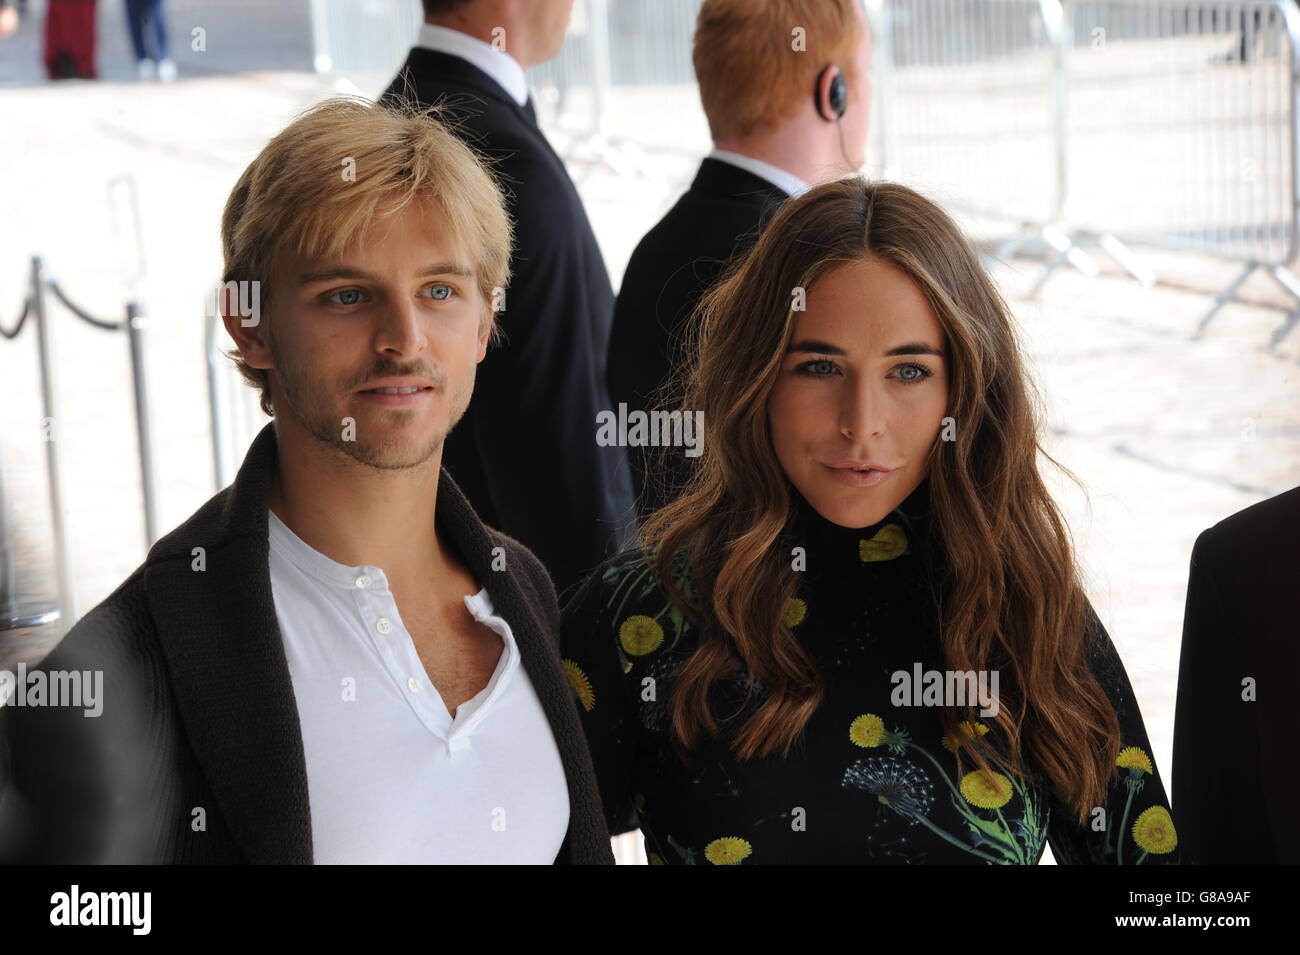 Brandon Green and Chloe Green arriving at the Topshop Unique catwalk show  at the Queen Elizabeth II Conference Centre as London Fashion Week SS16  catwalk shows. Picture Credit Should Read Edward Smith/